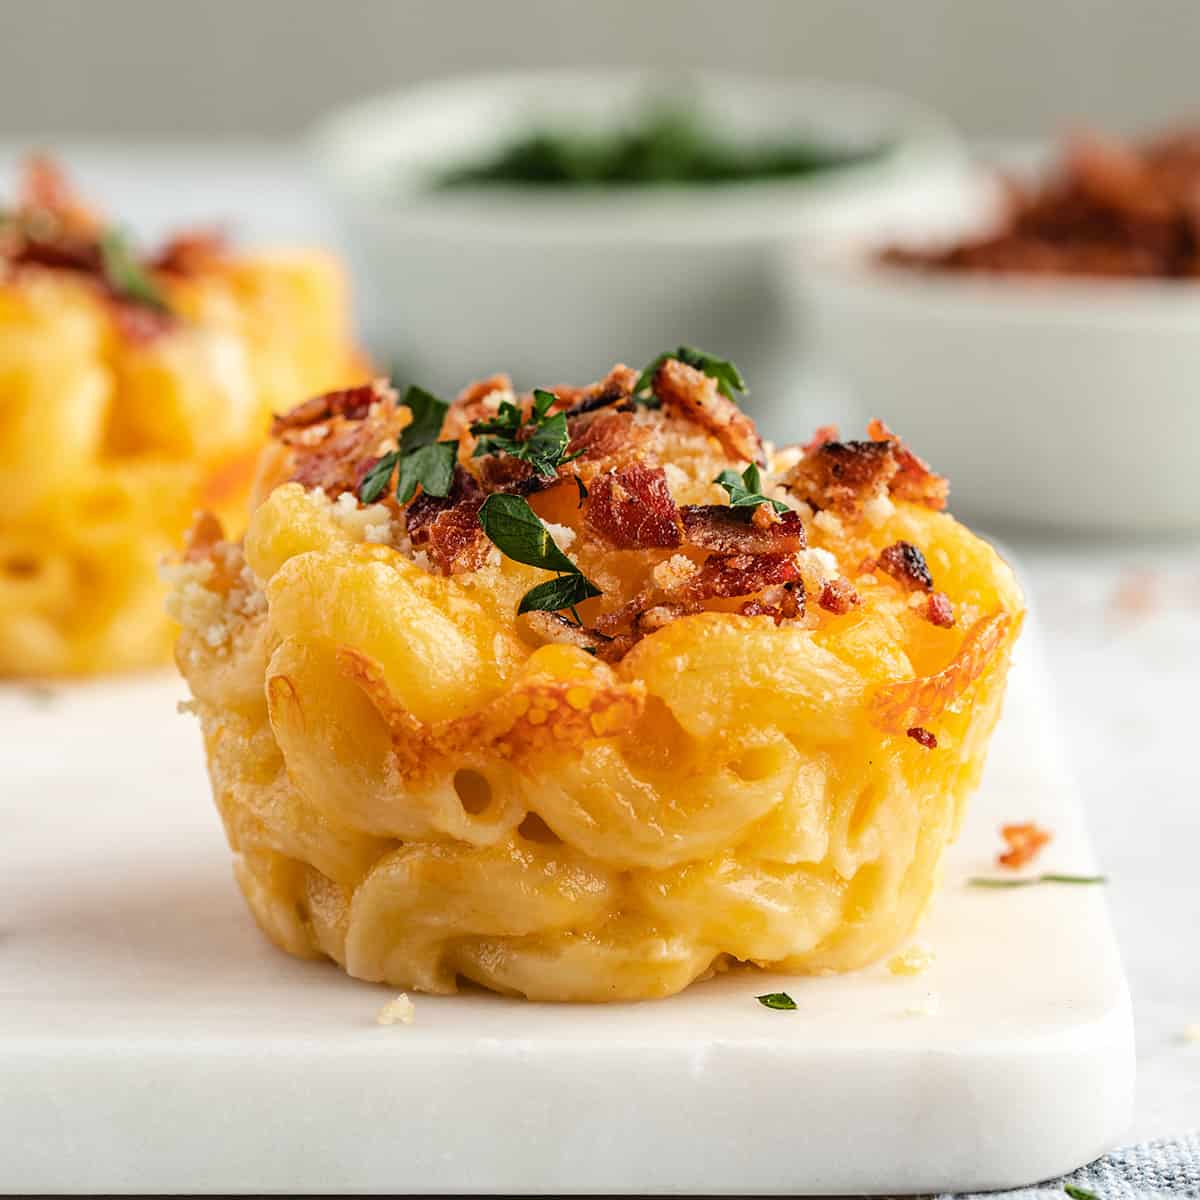 Baked Mac & Cheese Cups topped with crumbled bacon and parsley